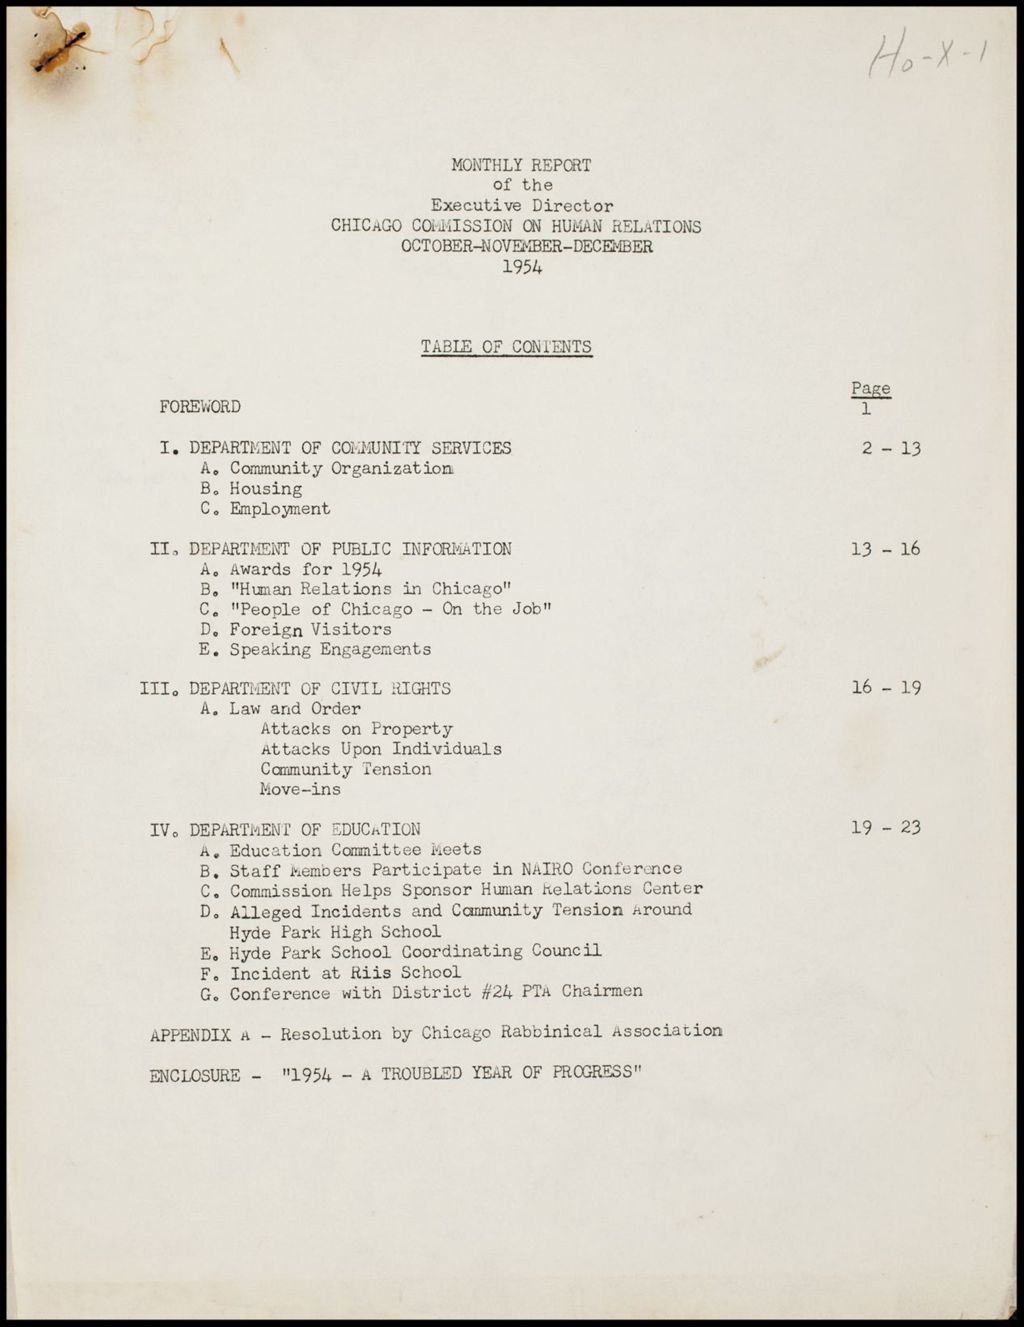 Miniature of Chicago Commission on Human Relations Executive Director reports, 1954-1955 (Folder I-2795)